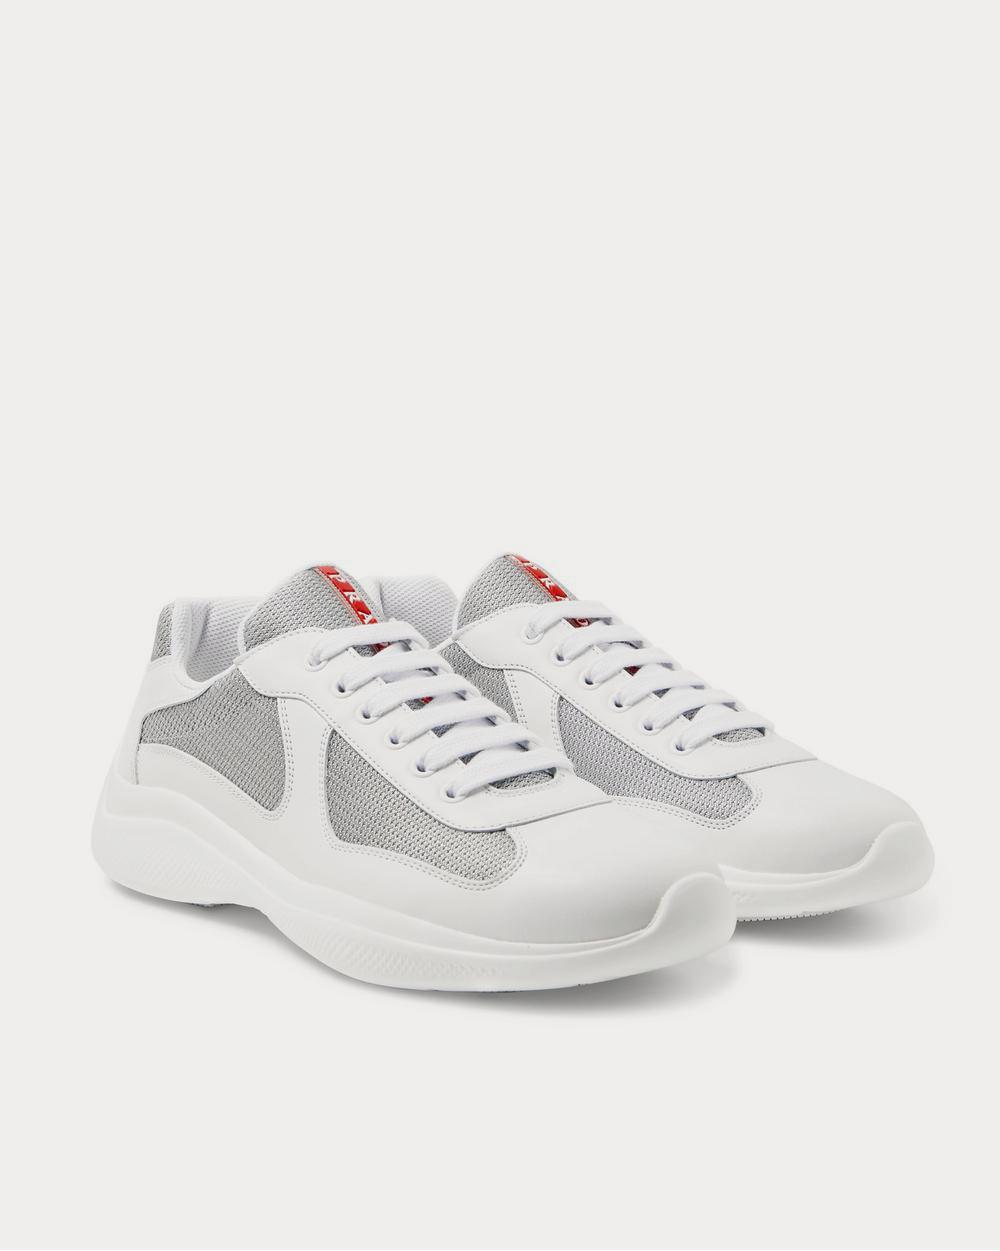 Prada - America's Cup Leather and Mesh  White low top sneakers